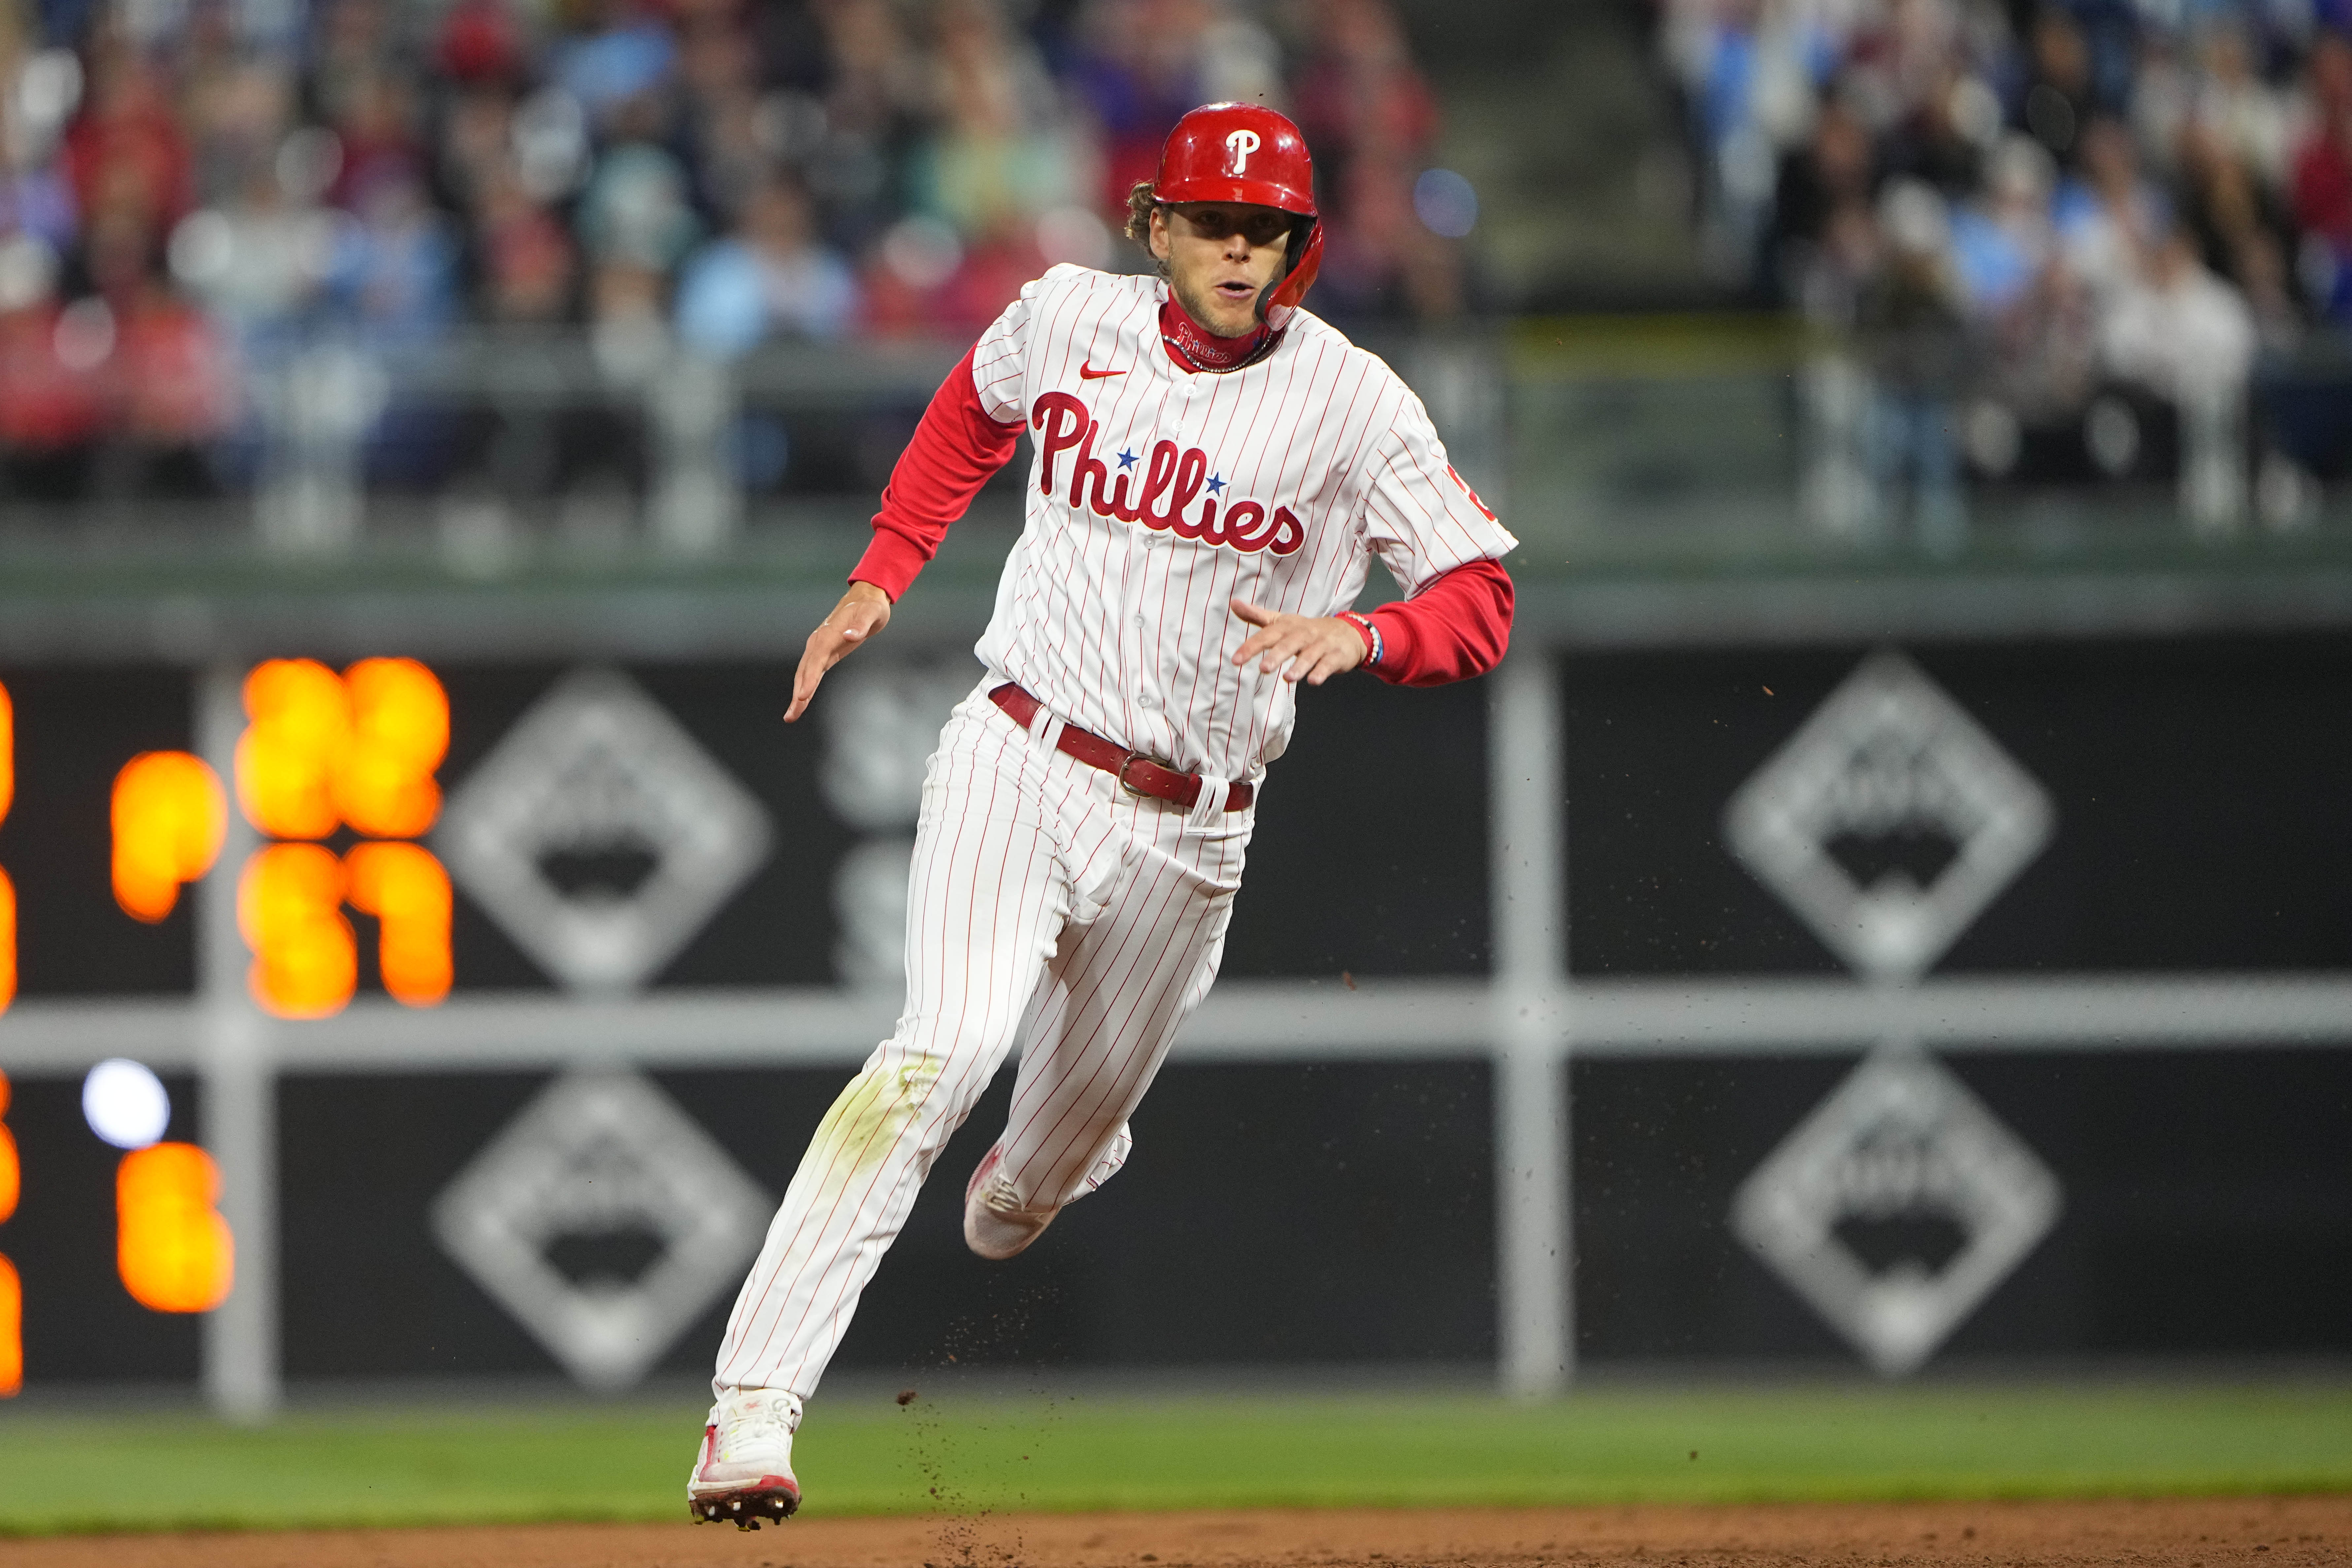 WATCH ALEC BOHM'S GREAT STAB AT 3RD FOR PHILS!